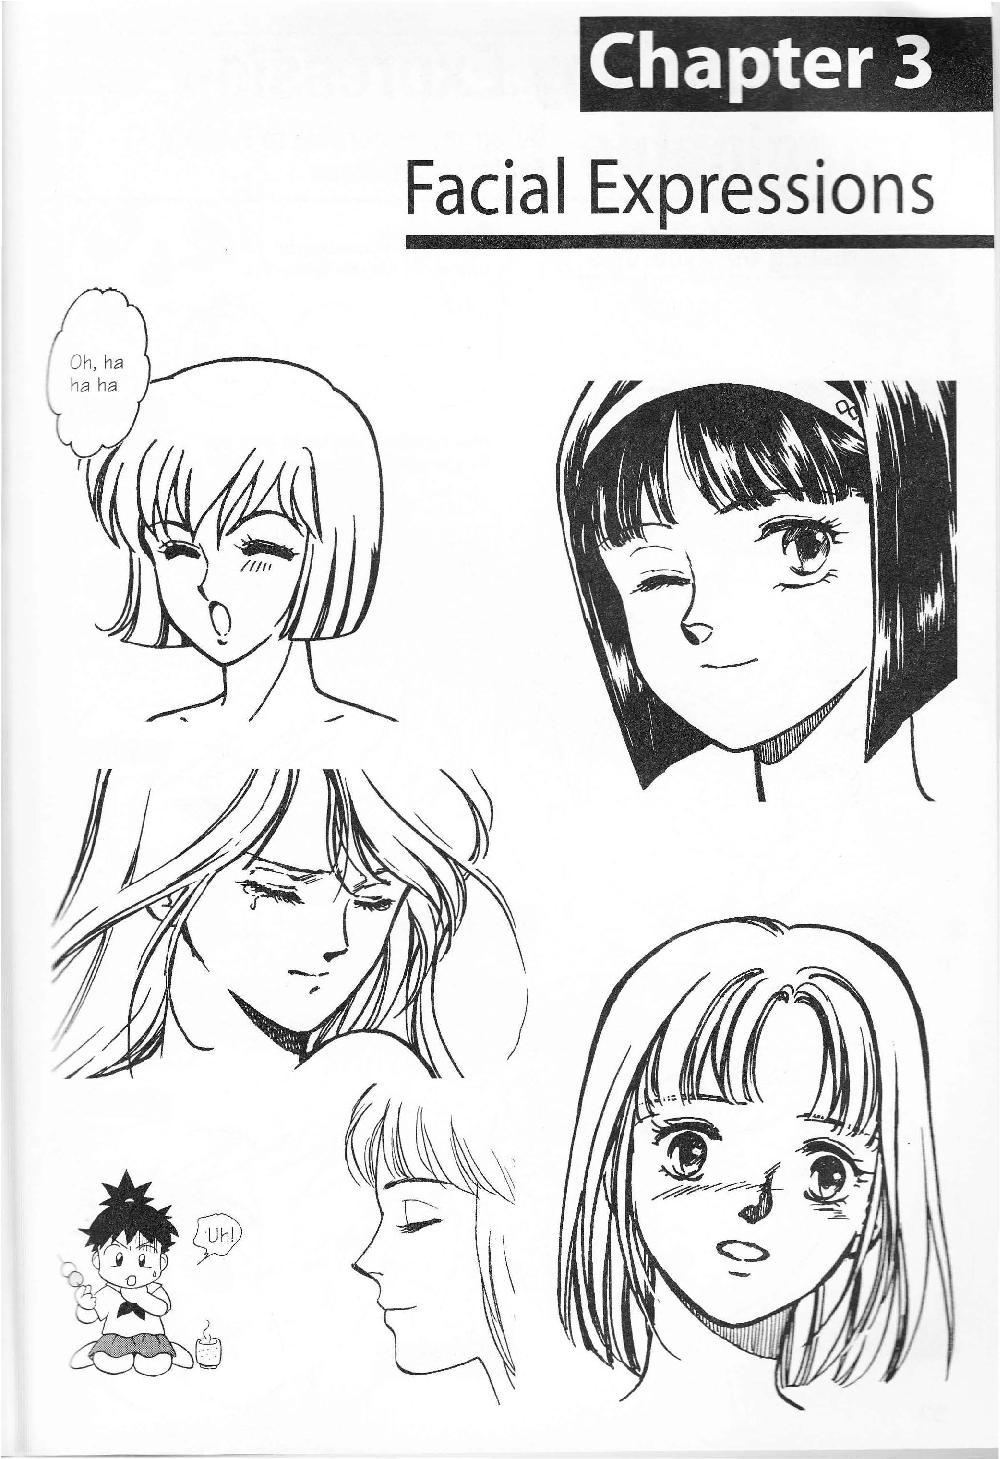 More How to Draw Manga Vol. 2 - Penning Characters 90